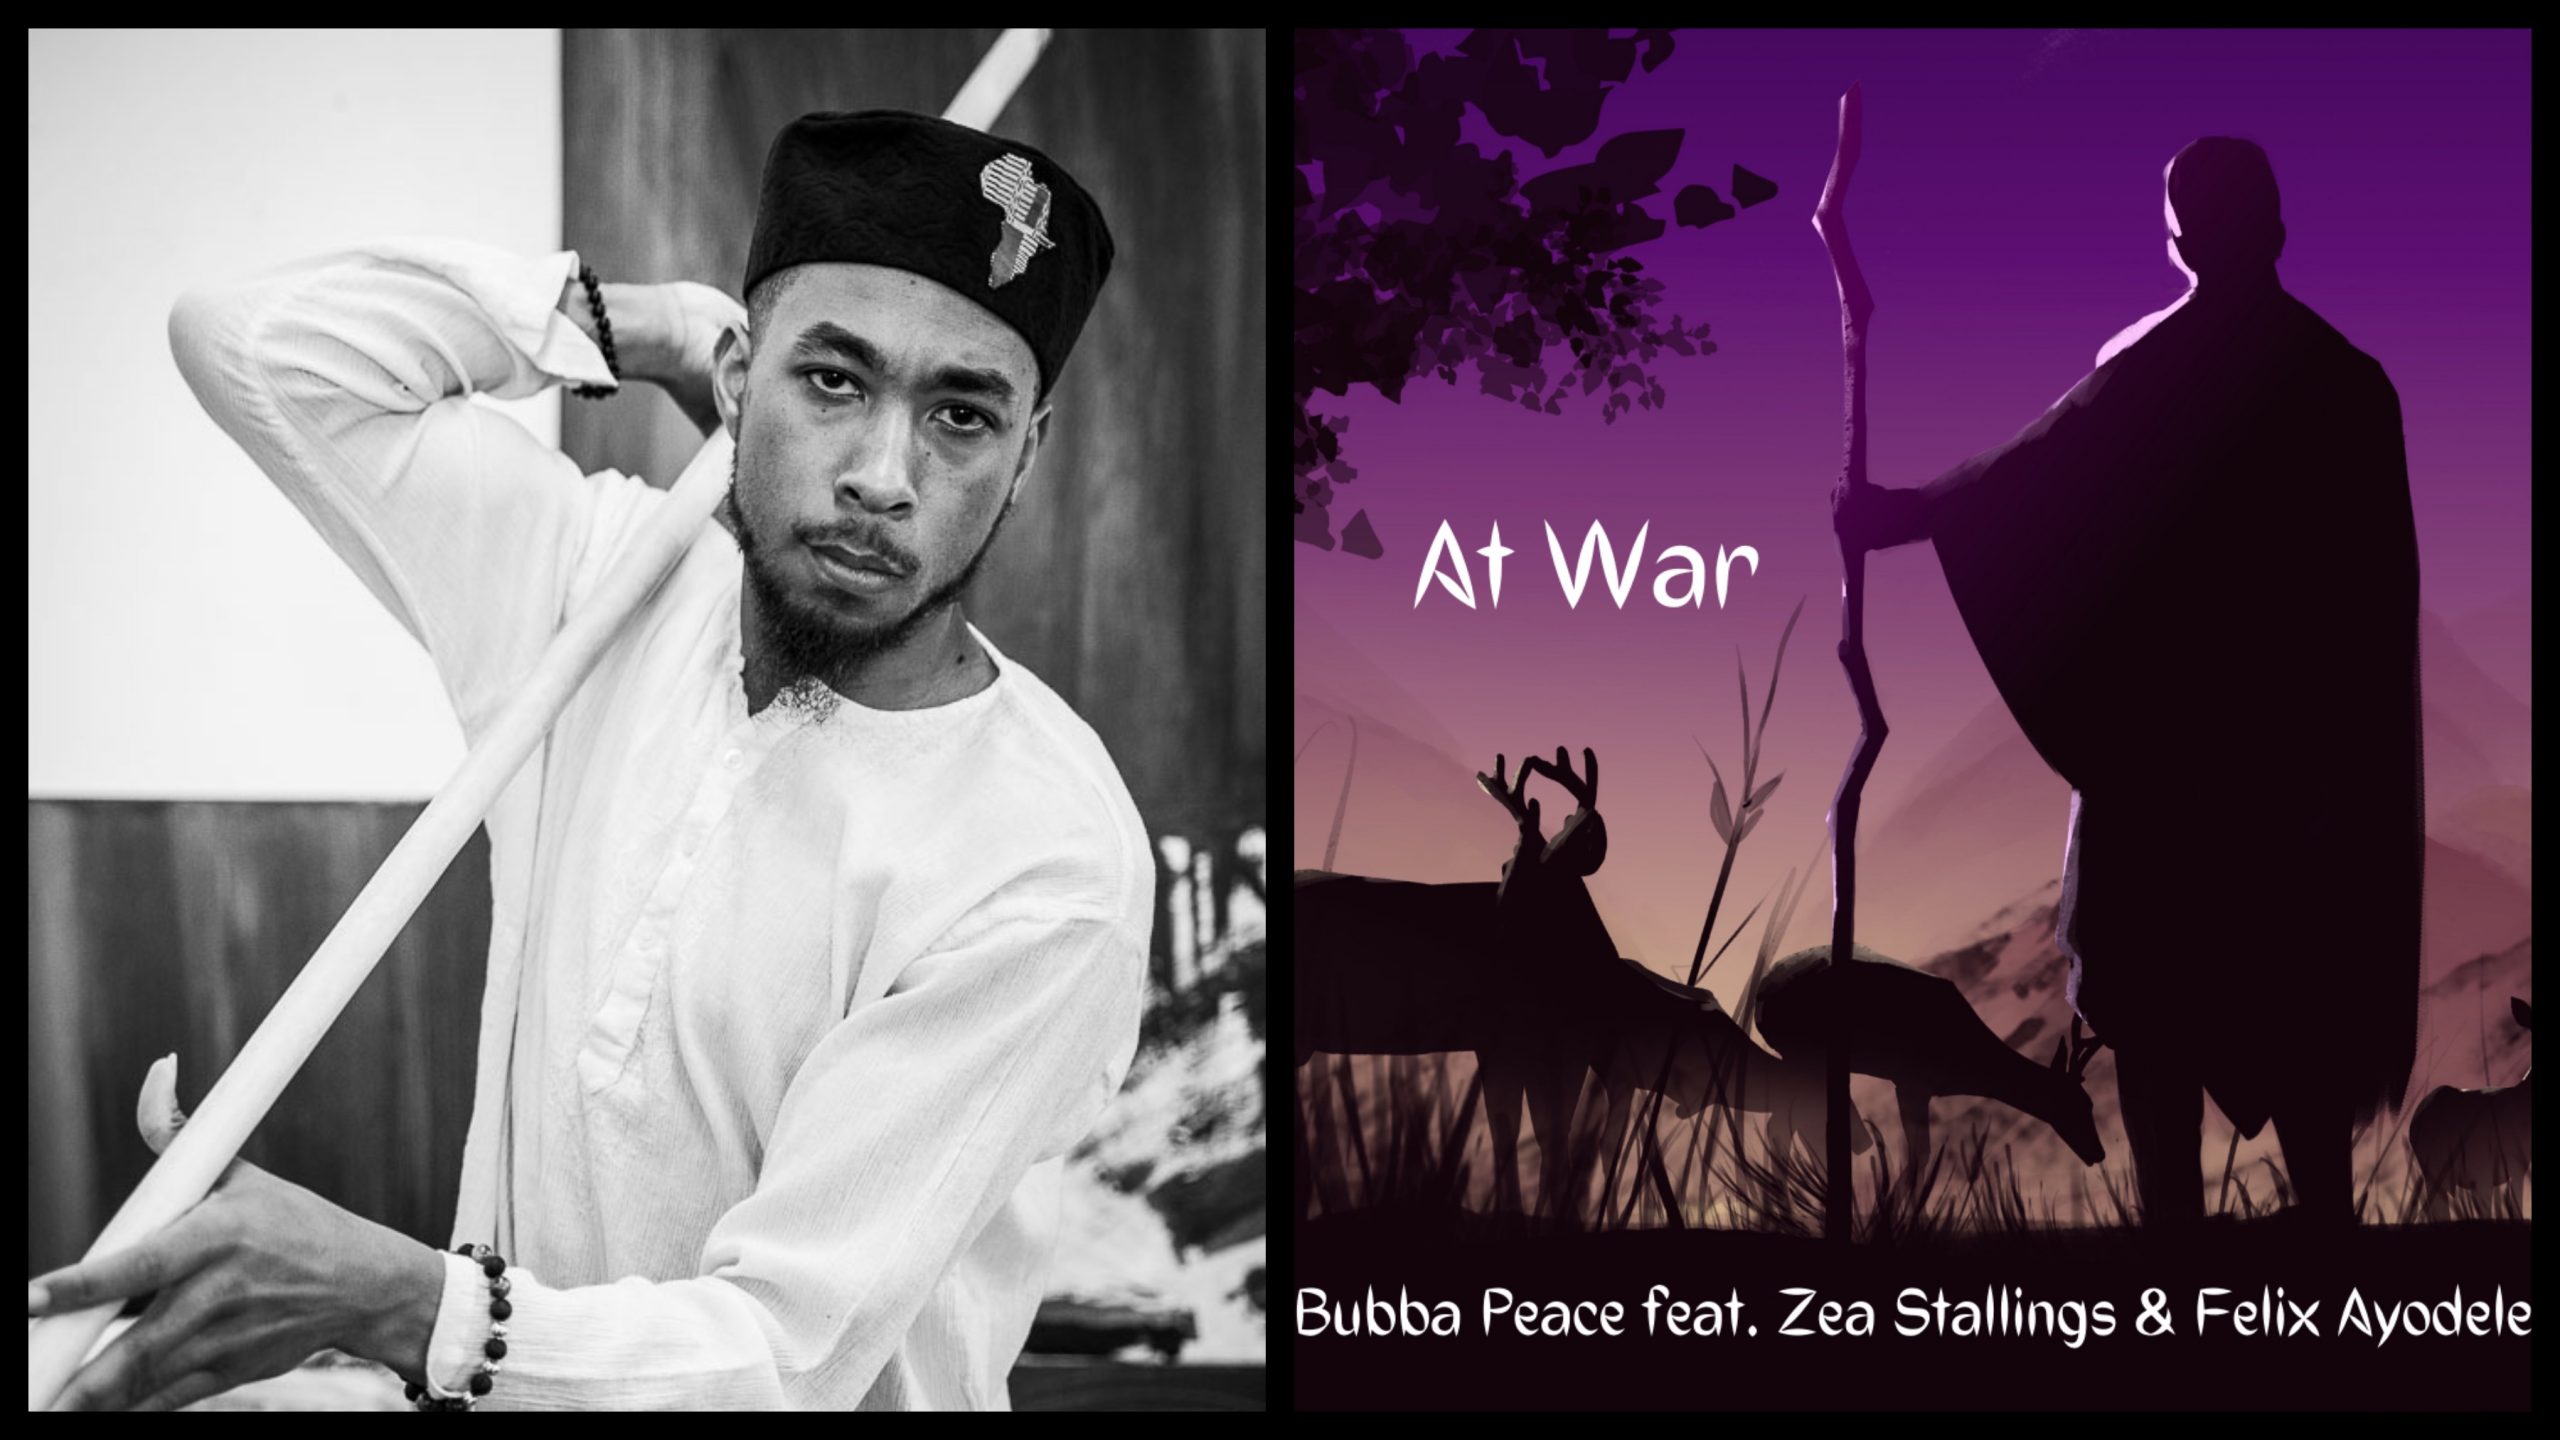 Bubba Peace releases At War featuring Zea Stallings and Felix Ayodele – it tells the story of the mountains we need to climb to find inner peace